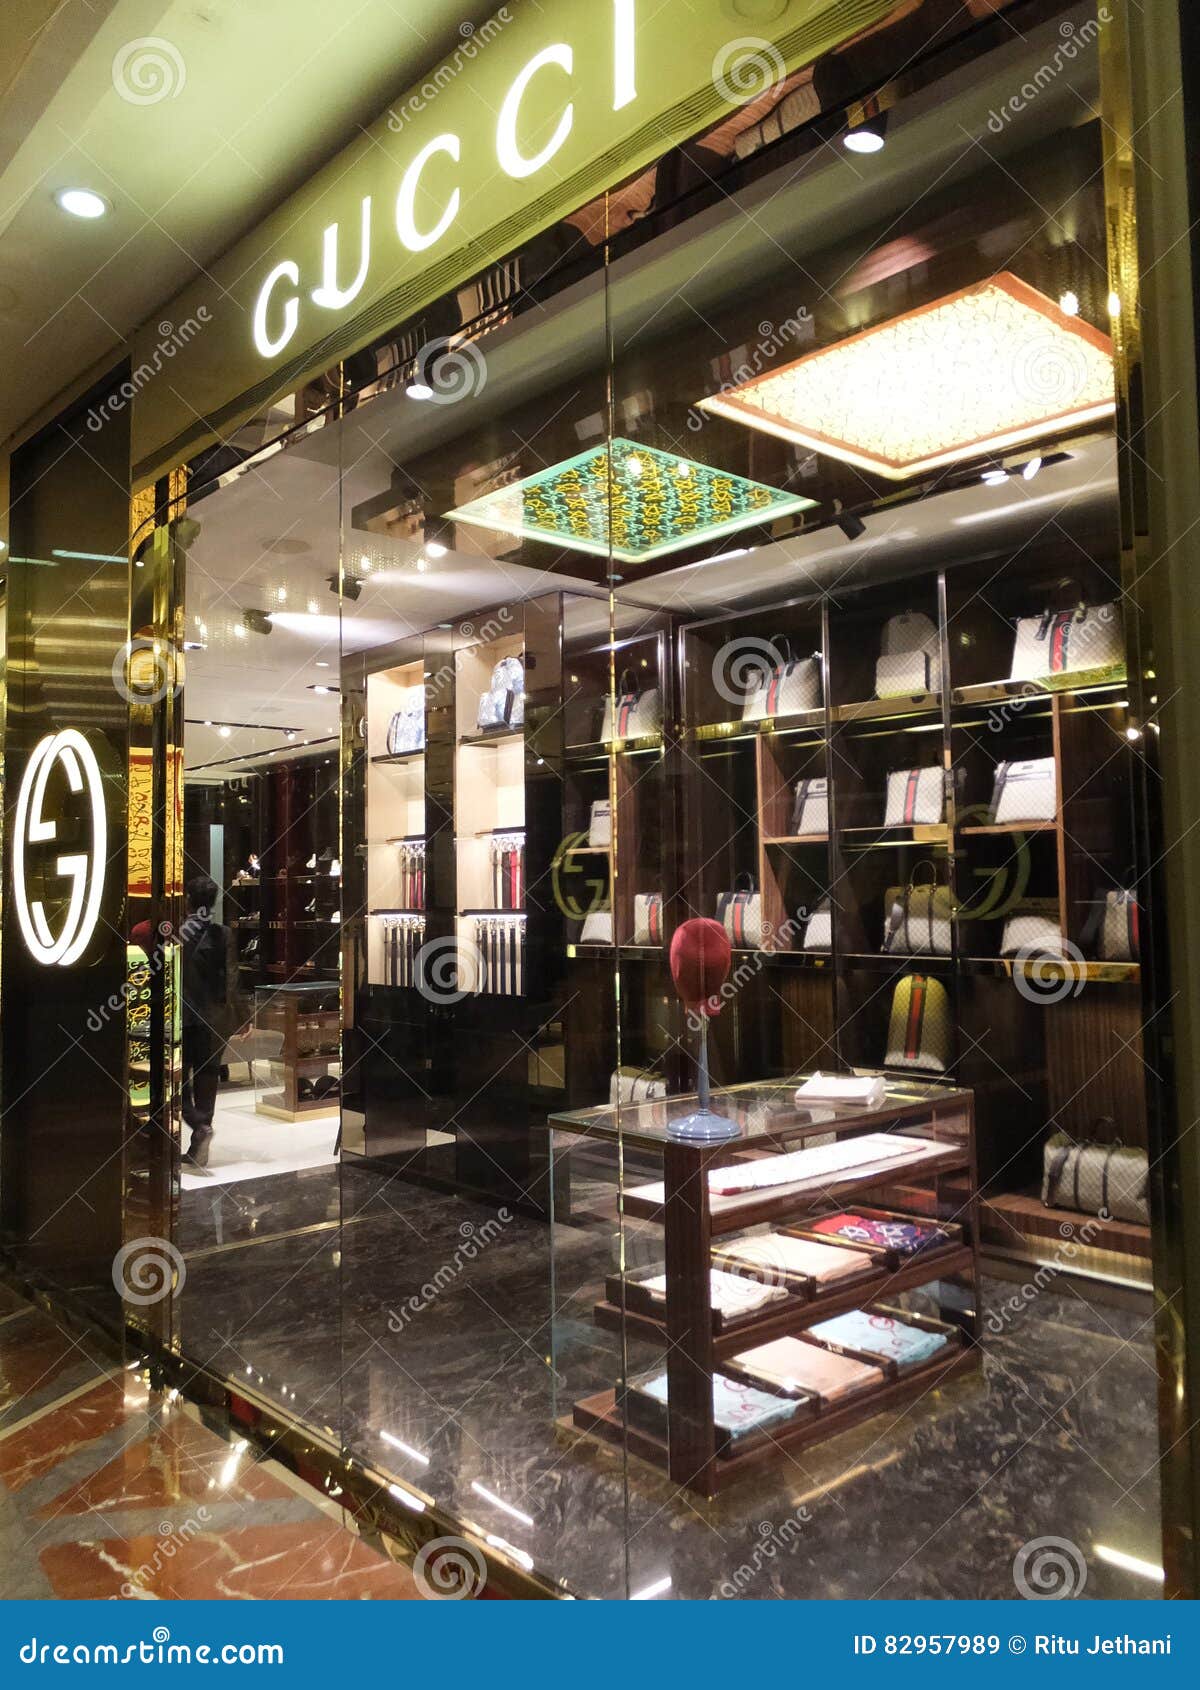 Gucci Store At The High Street Phoenix Mall In Mumbai Editorial Stock Image - Image of high ...